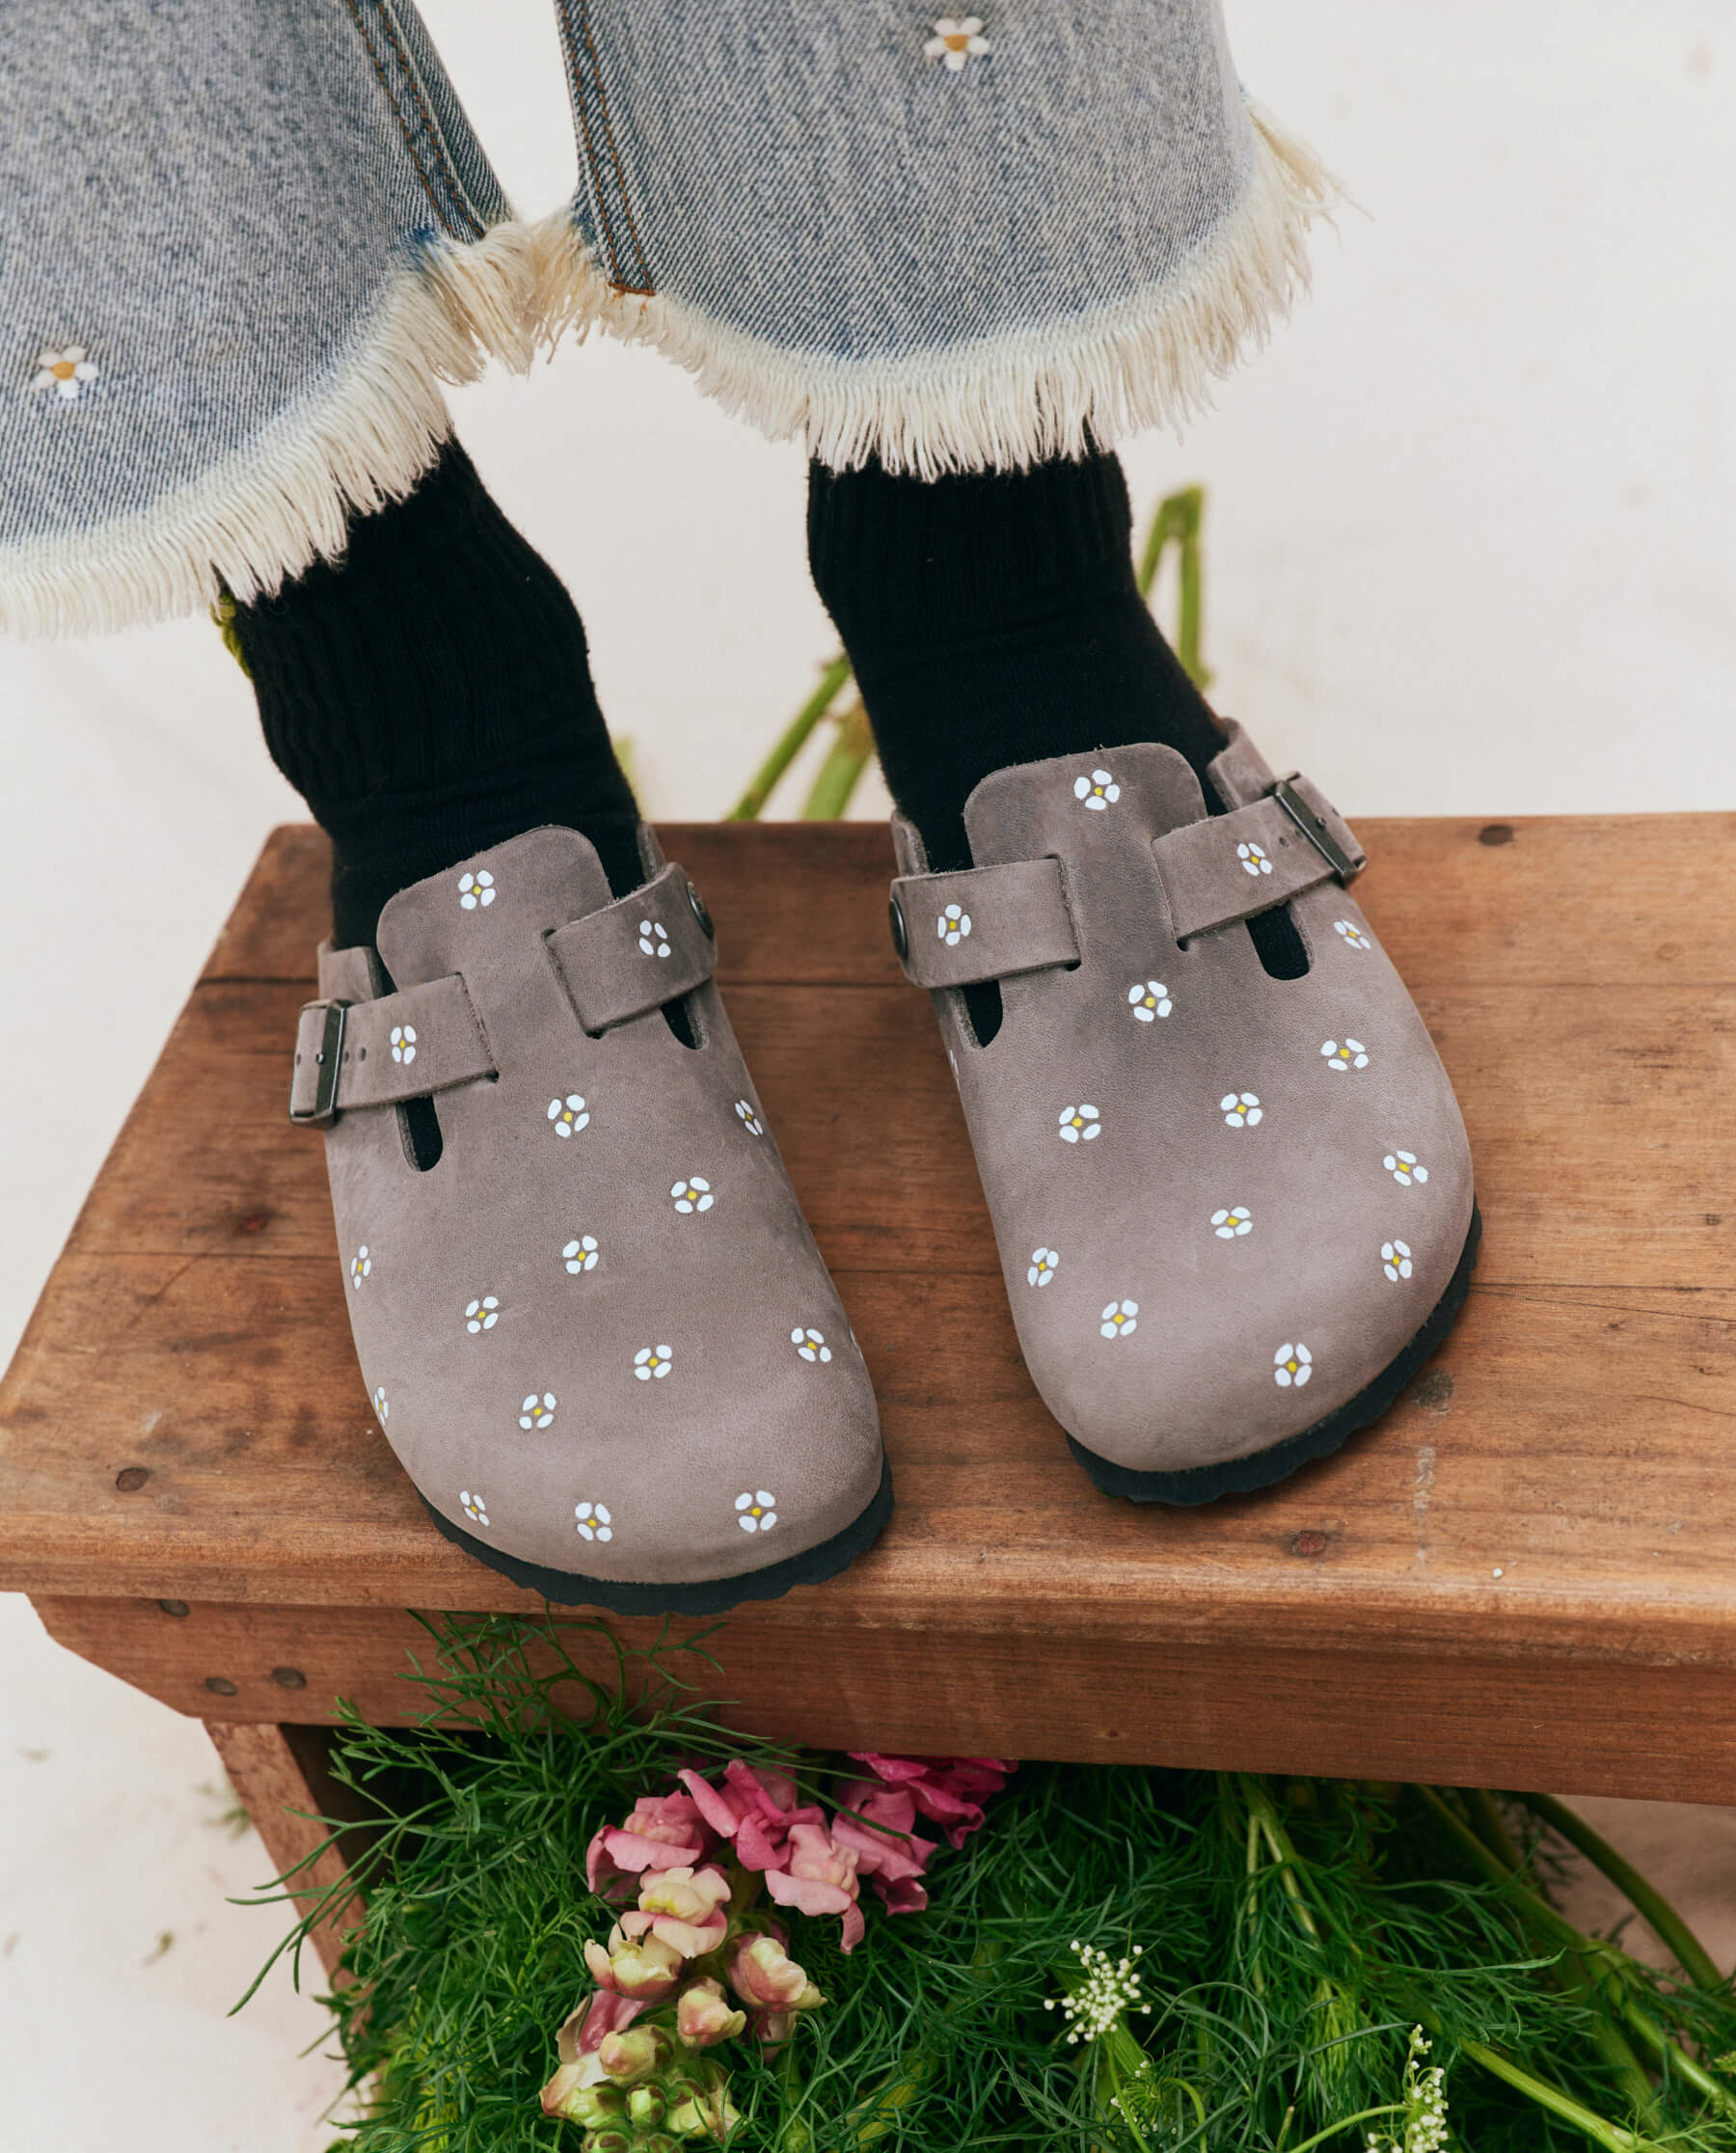 BIRKENSTOCK Boston with Hand Painted Tooled Daisy. -- Iron Oiled Leather with Cream